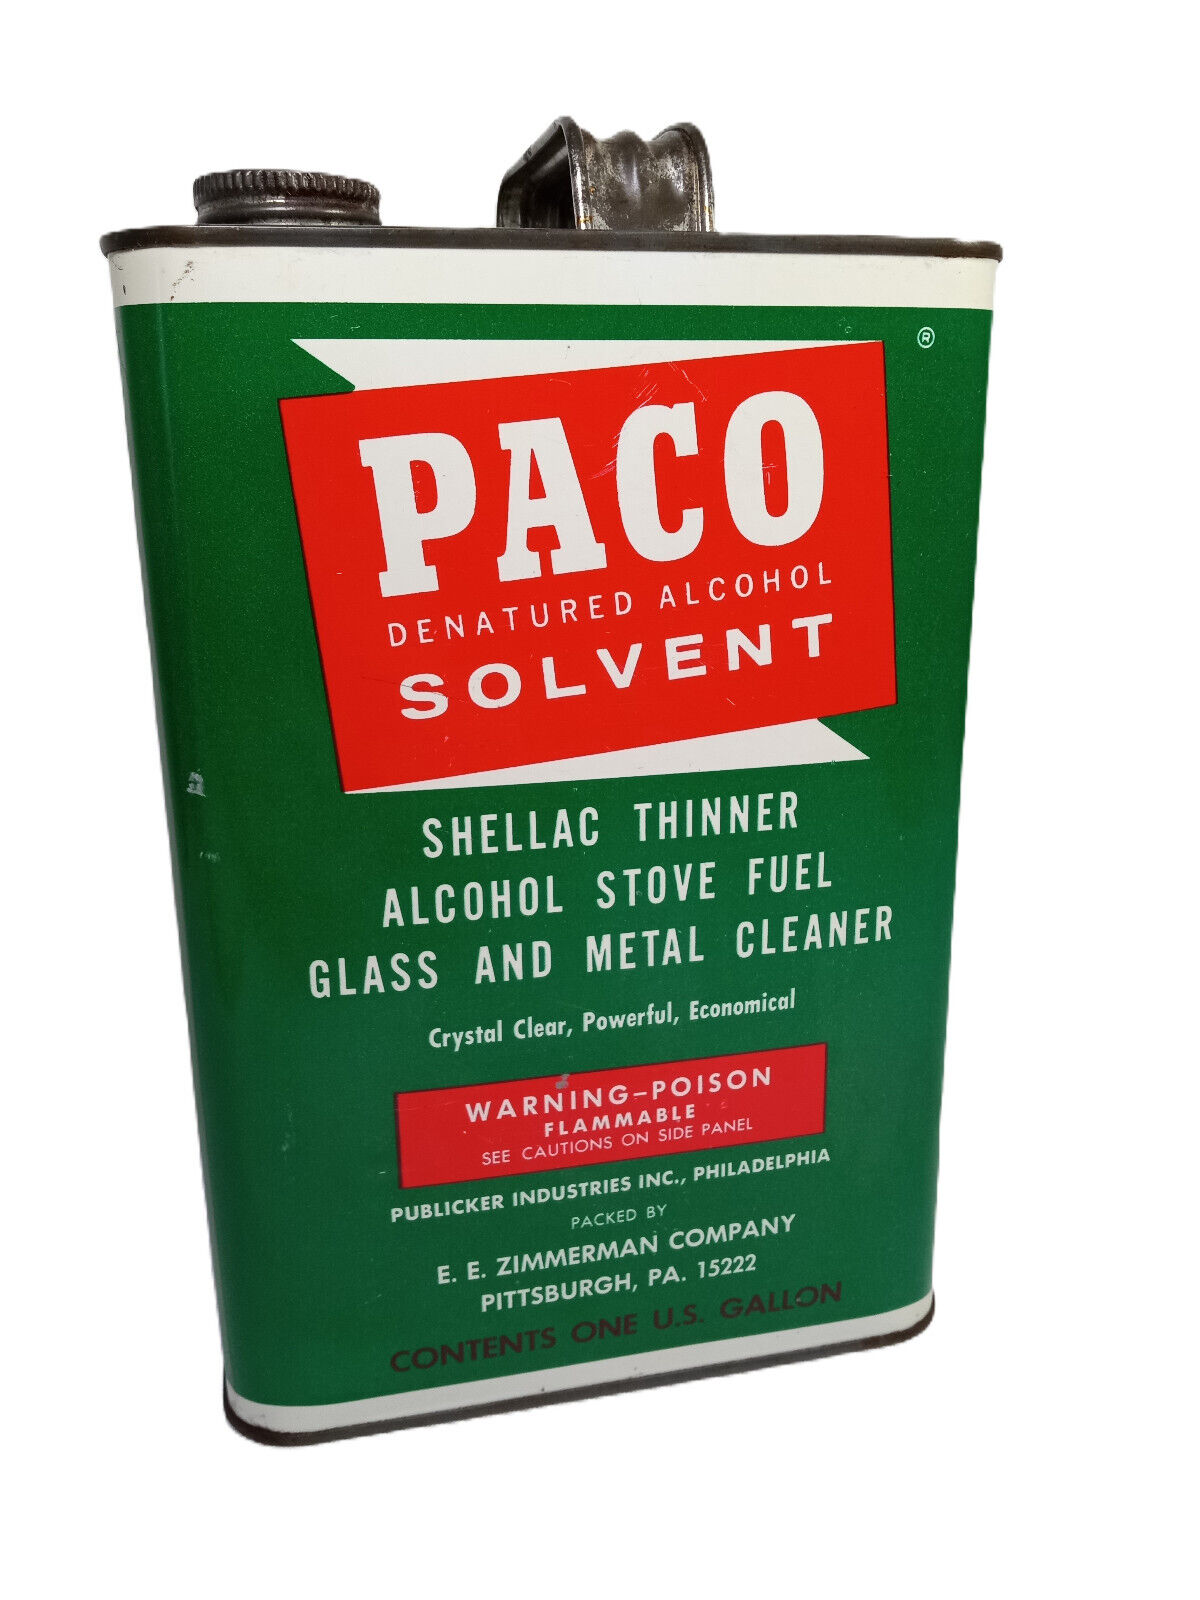 Vintage Paco Solvent Charcoal EMPTY Can 1 Pint Stove Fuel Shellac Thinner